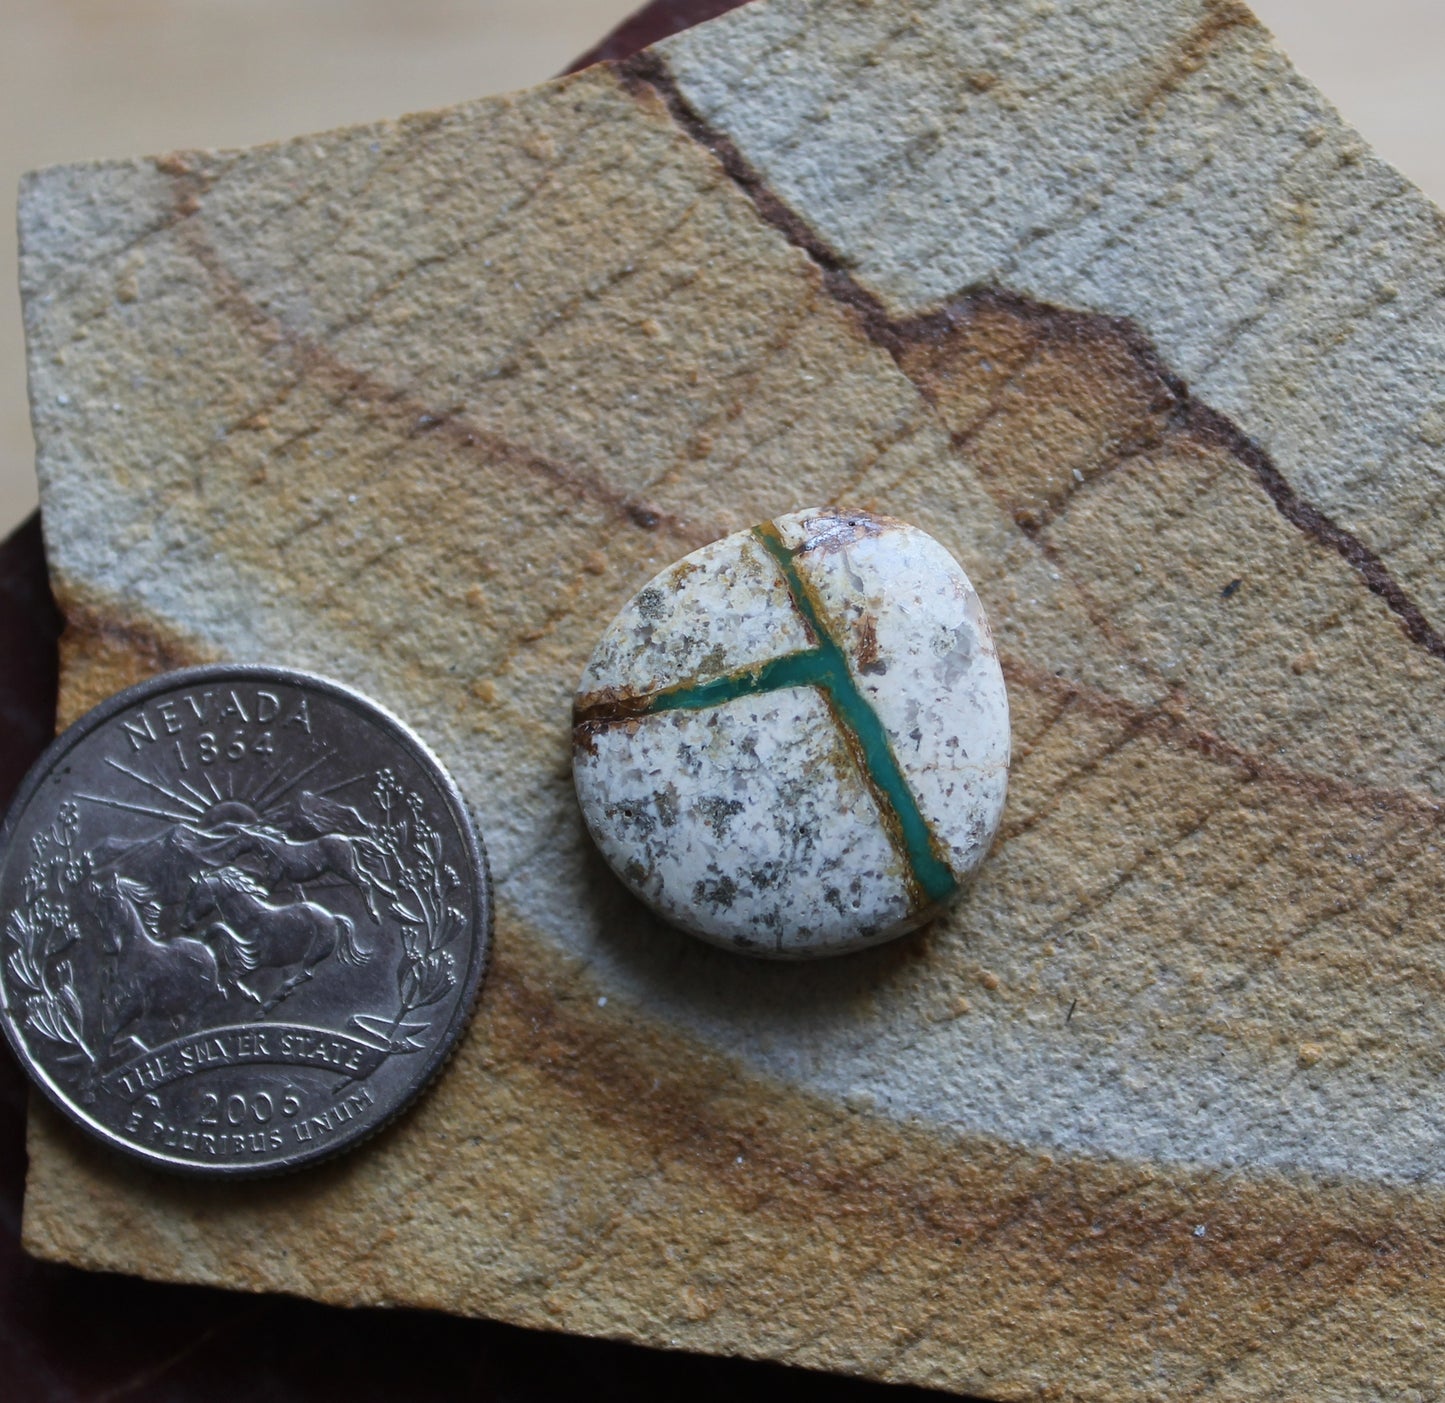 18 carat boulder-cut Stone Mountain Turquoise cabochon with green veins